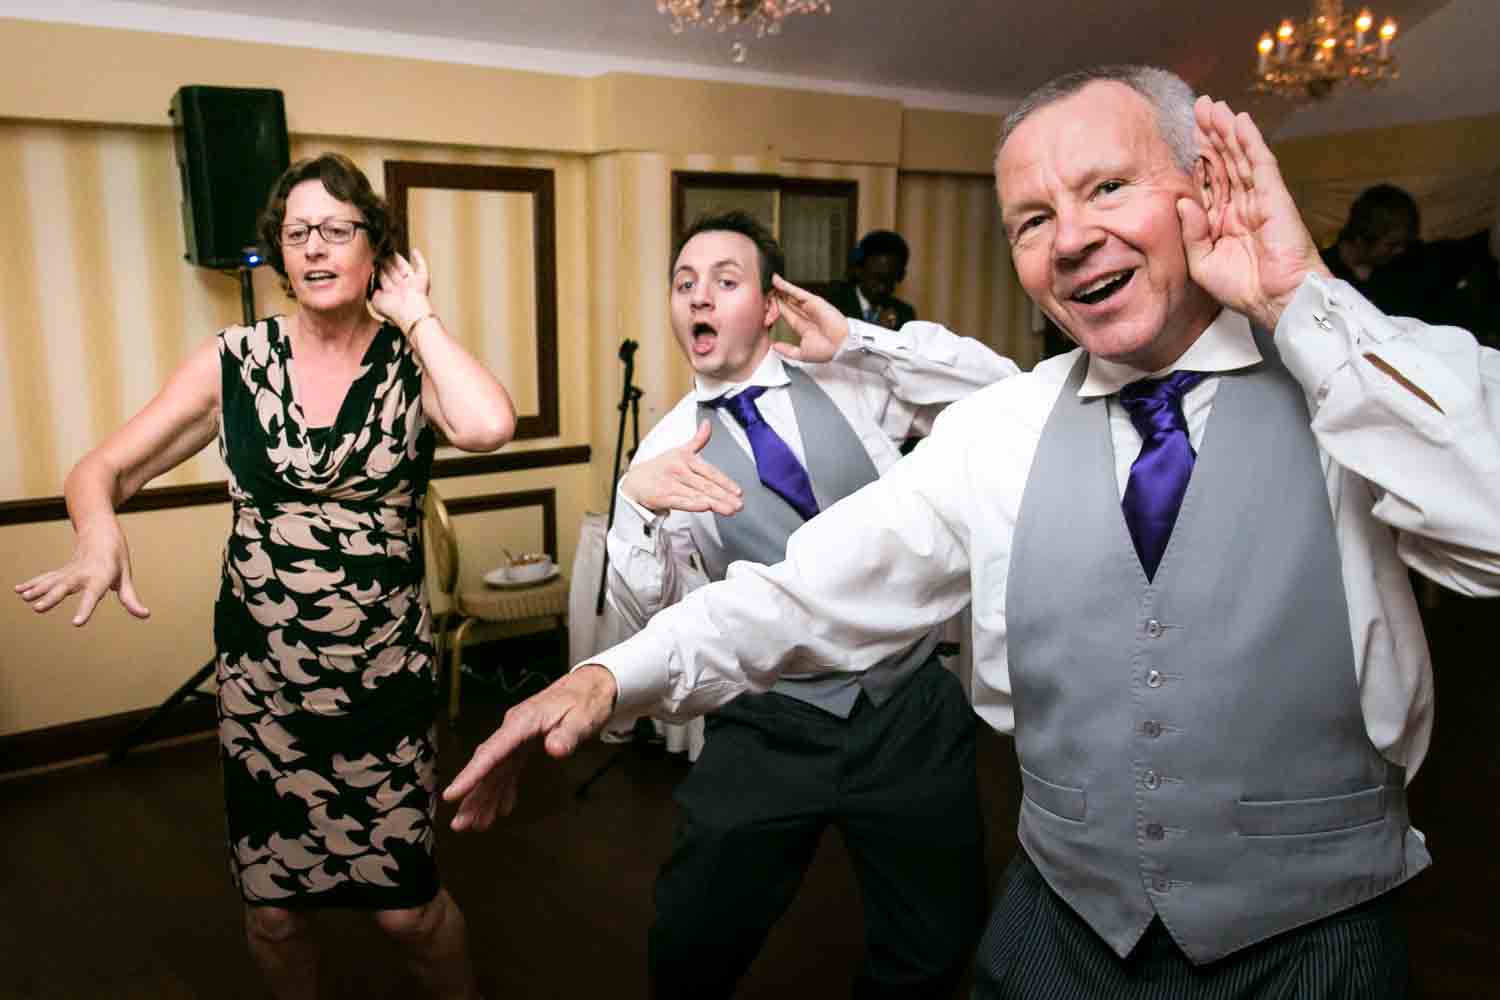 Three guests dancing at wedding reception with arms outstretched